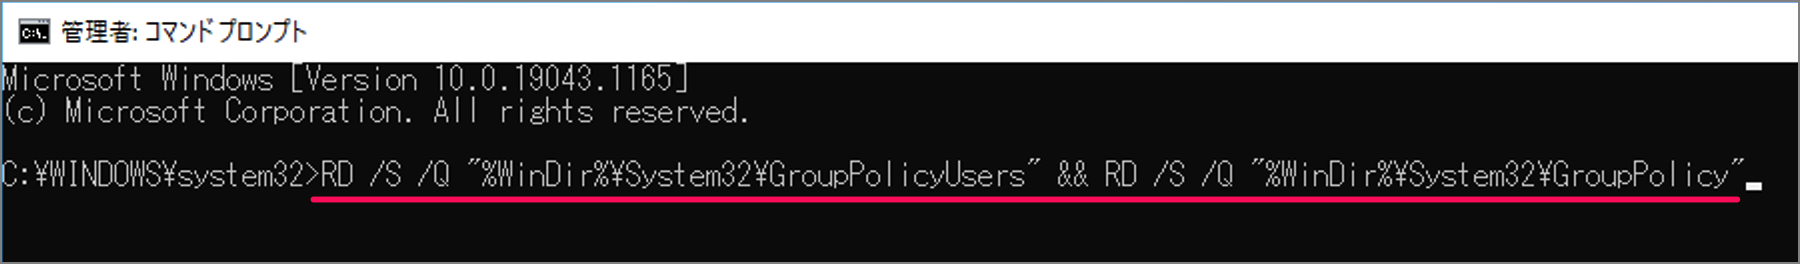 reset group policy settings in windows 10 08